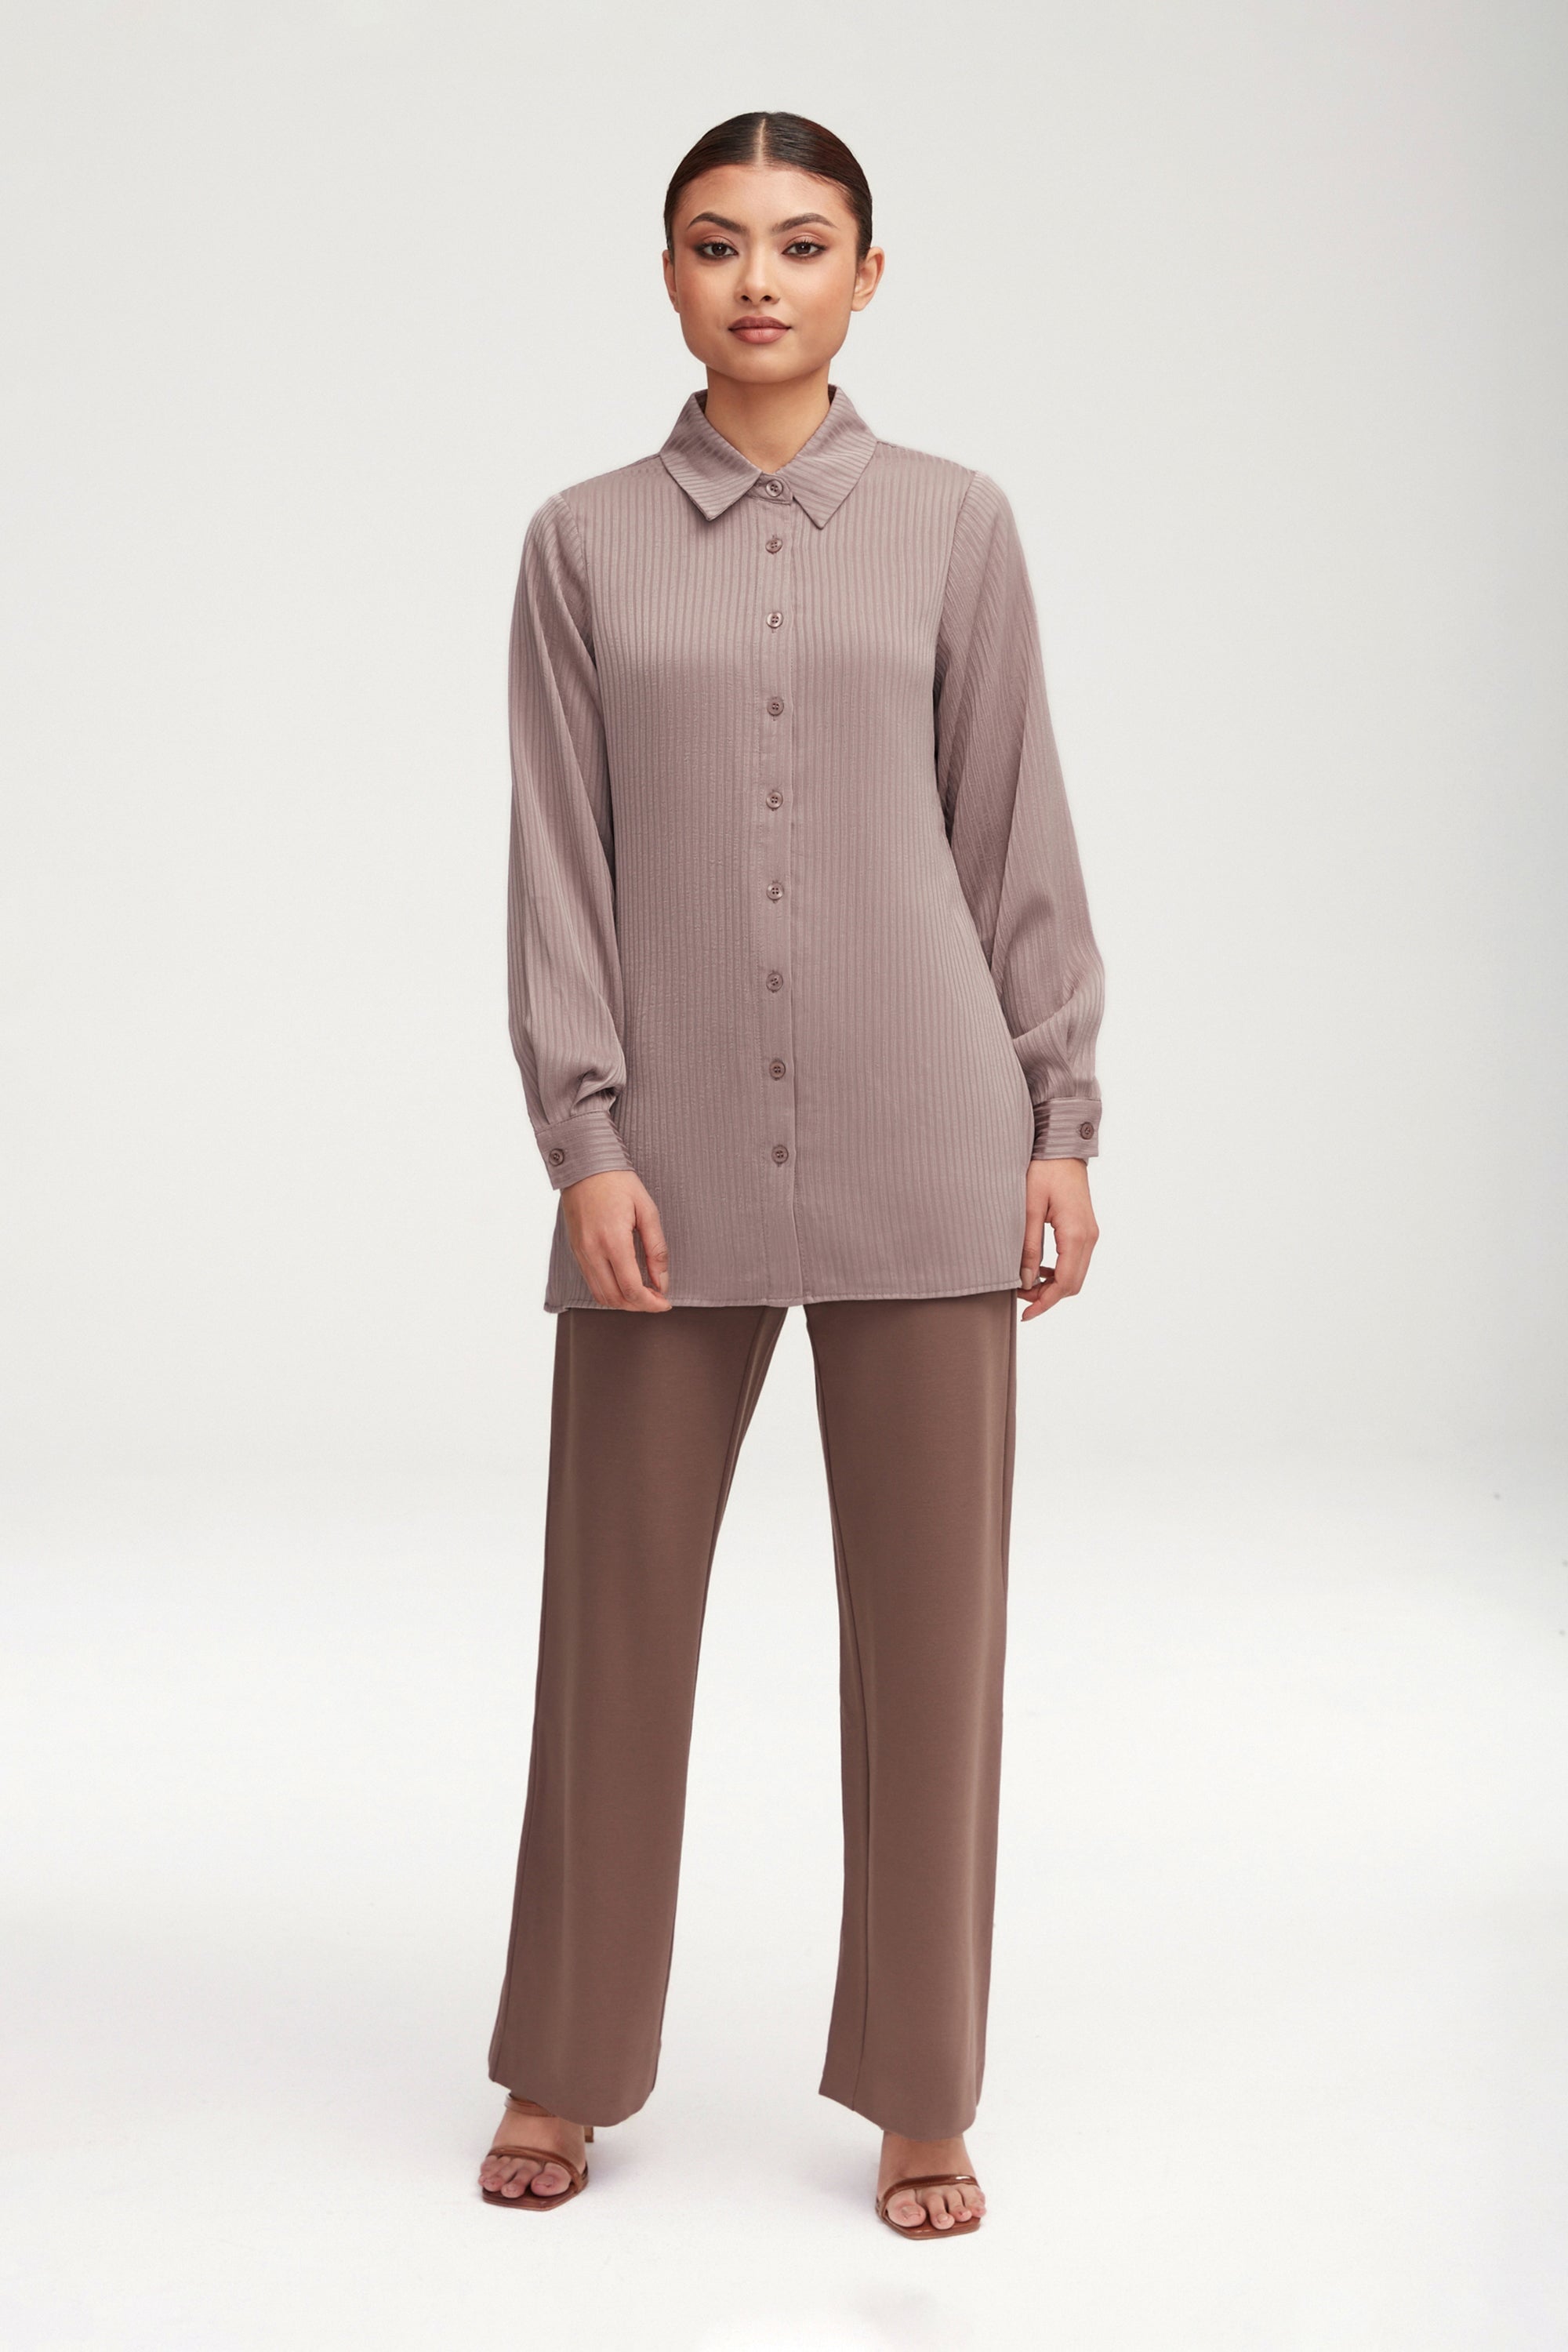 Jaserah Button Down Top - Taupe Clothing epschoolboard 